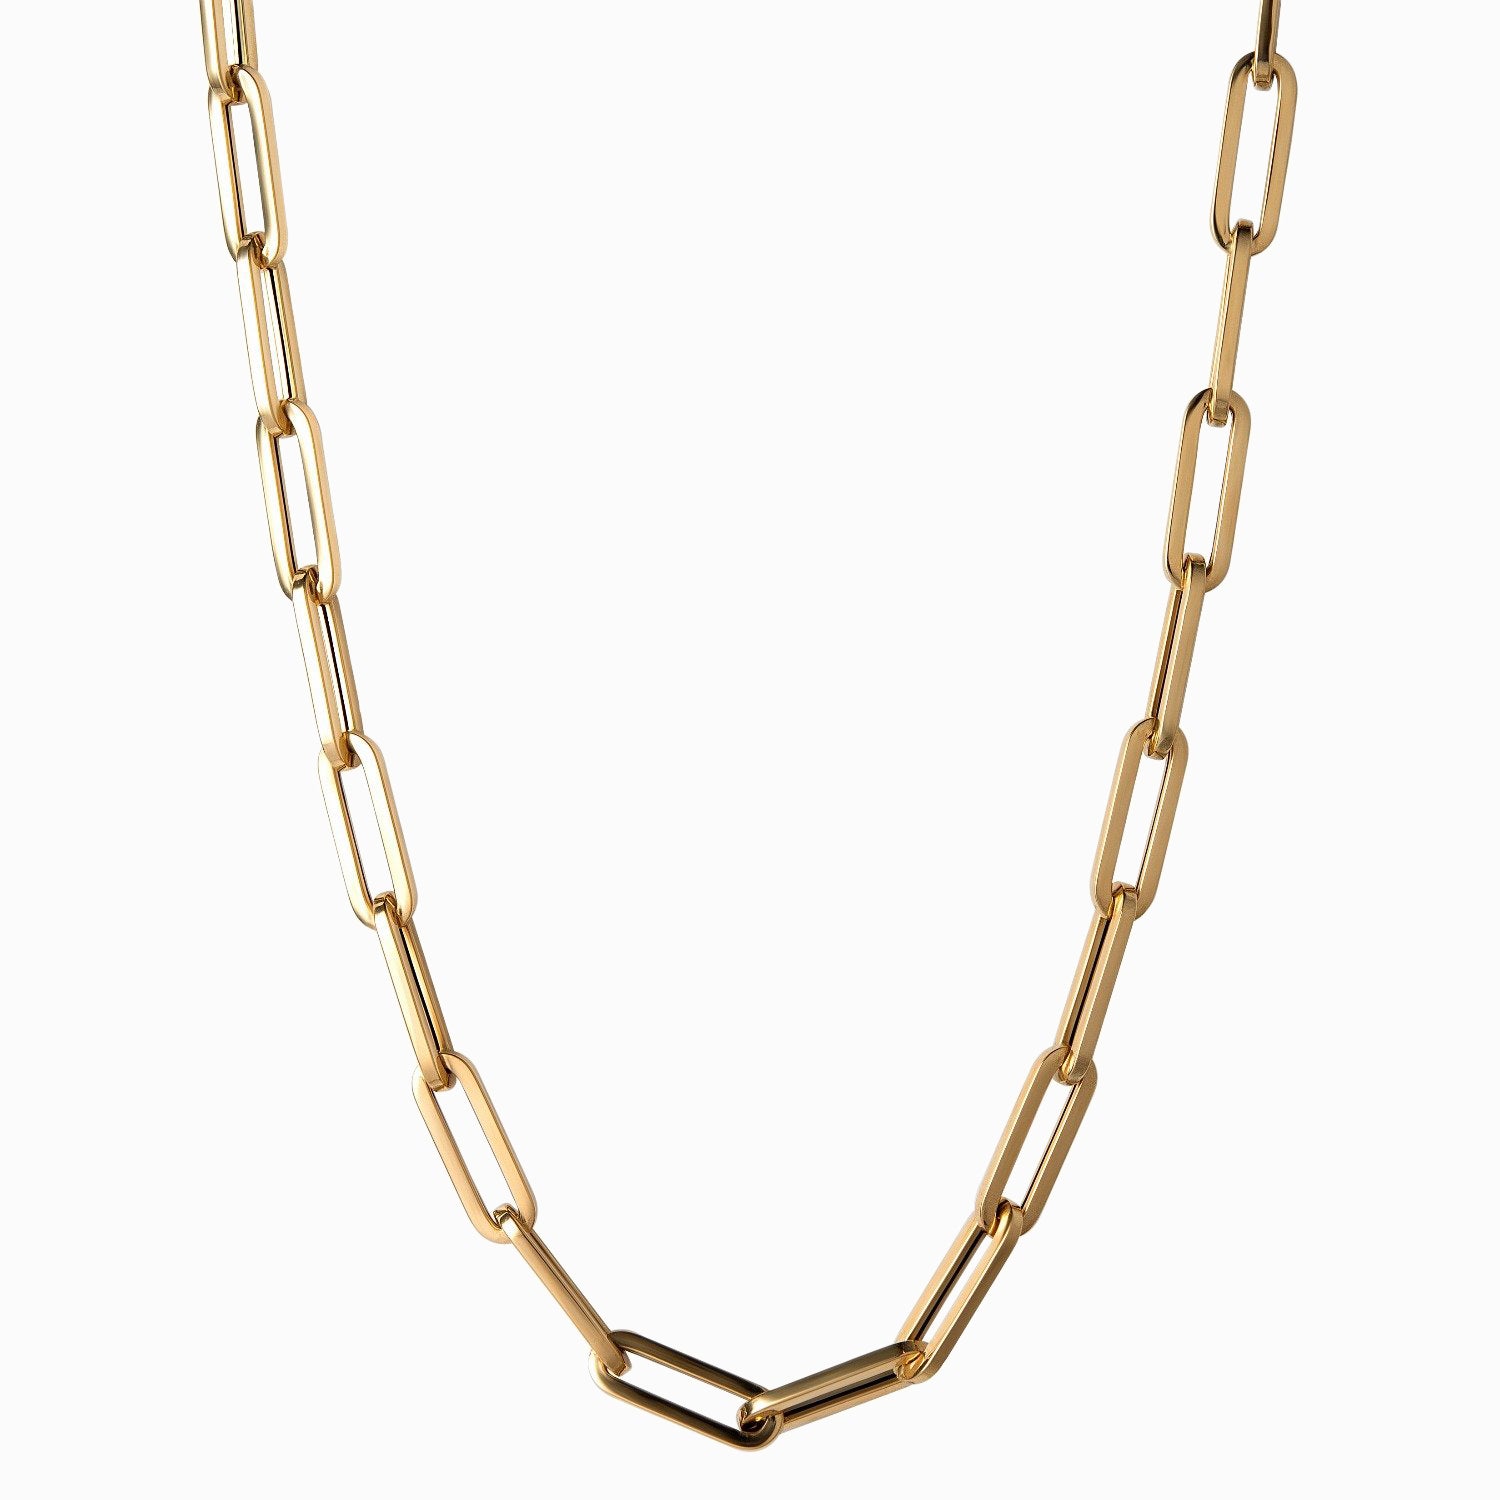 Chunky Adjustable Gold Paperclip Chain necklace - Nest Pretty Things